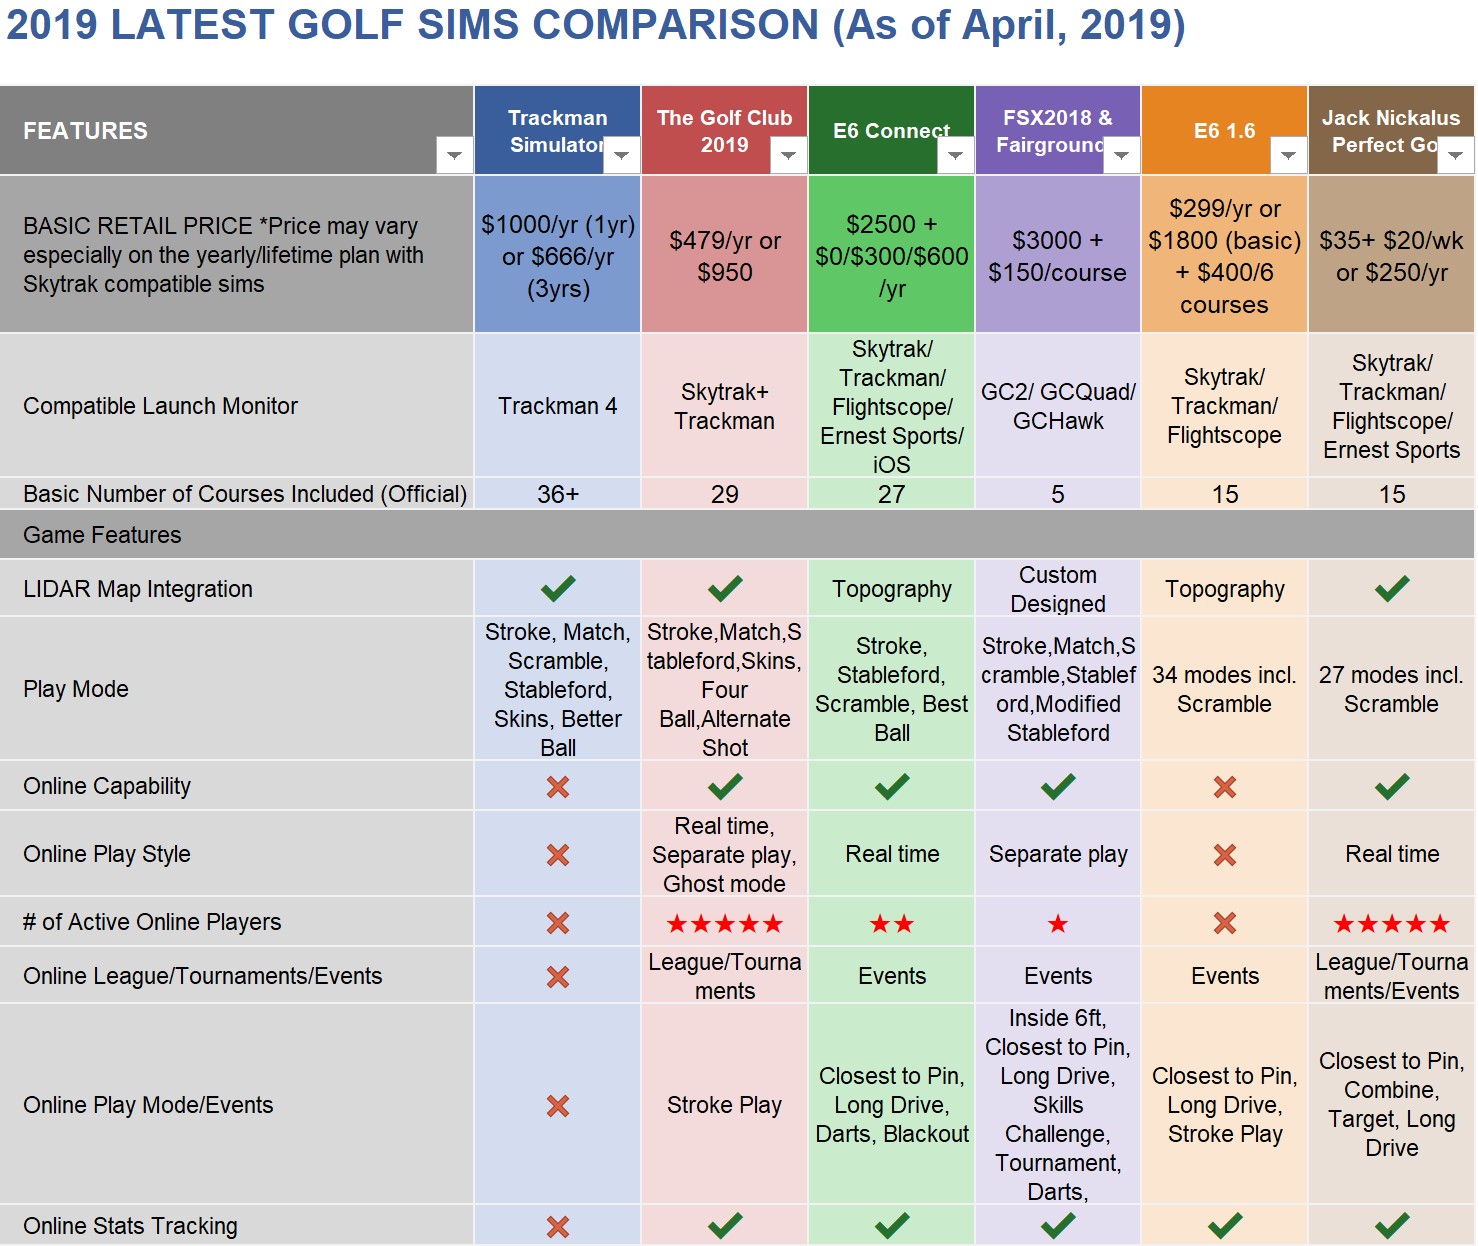 Golf Sims Comparisons (As of 2019) (Click for – LEO MODE's Reviews – Anchoring 'Only Facts'